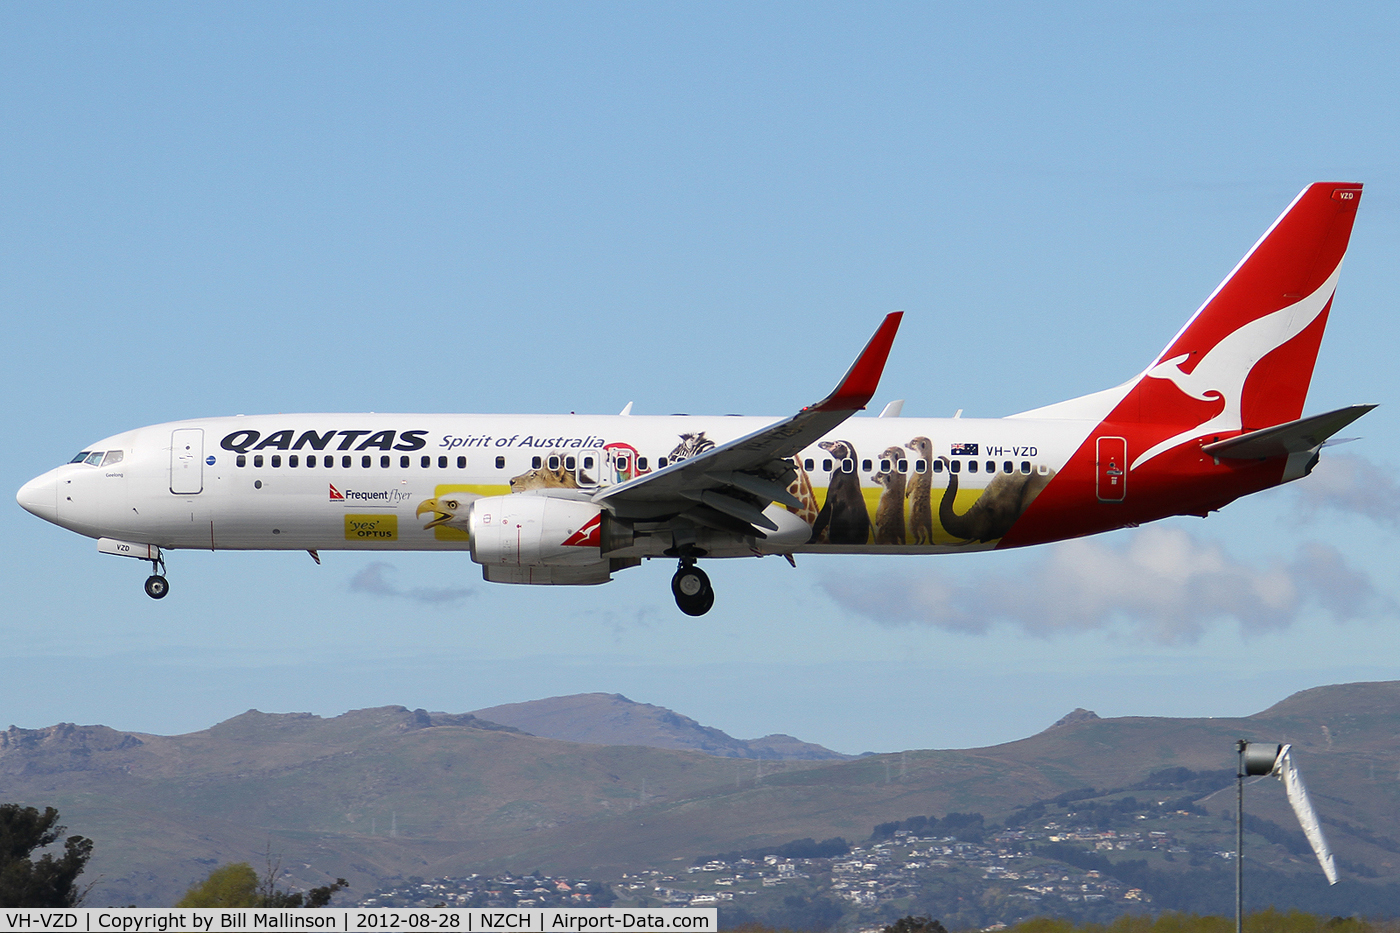 VH-VZD, 2008 Boeing 737-838 C/N 34198, finals to 02